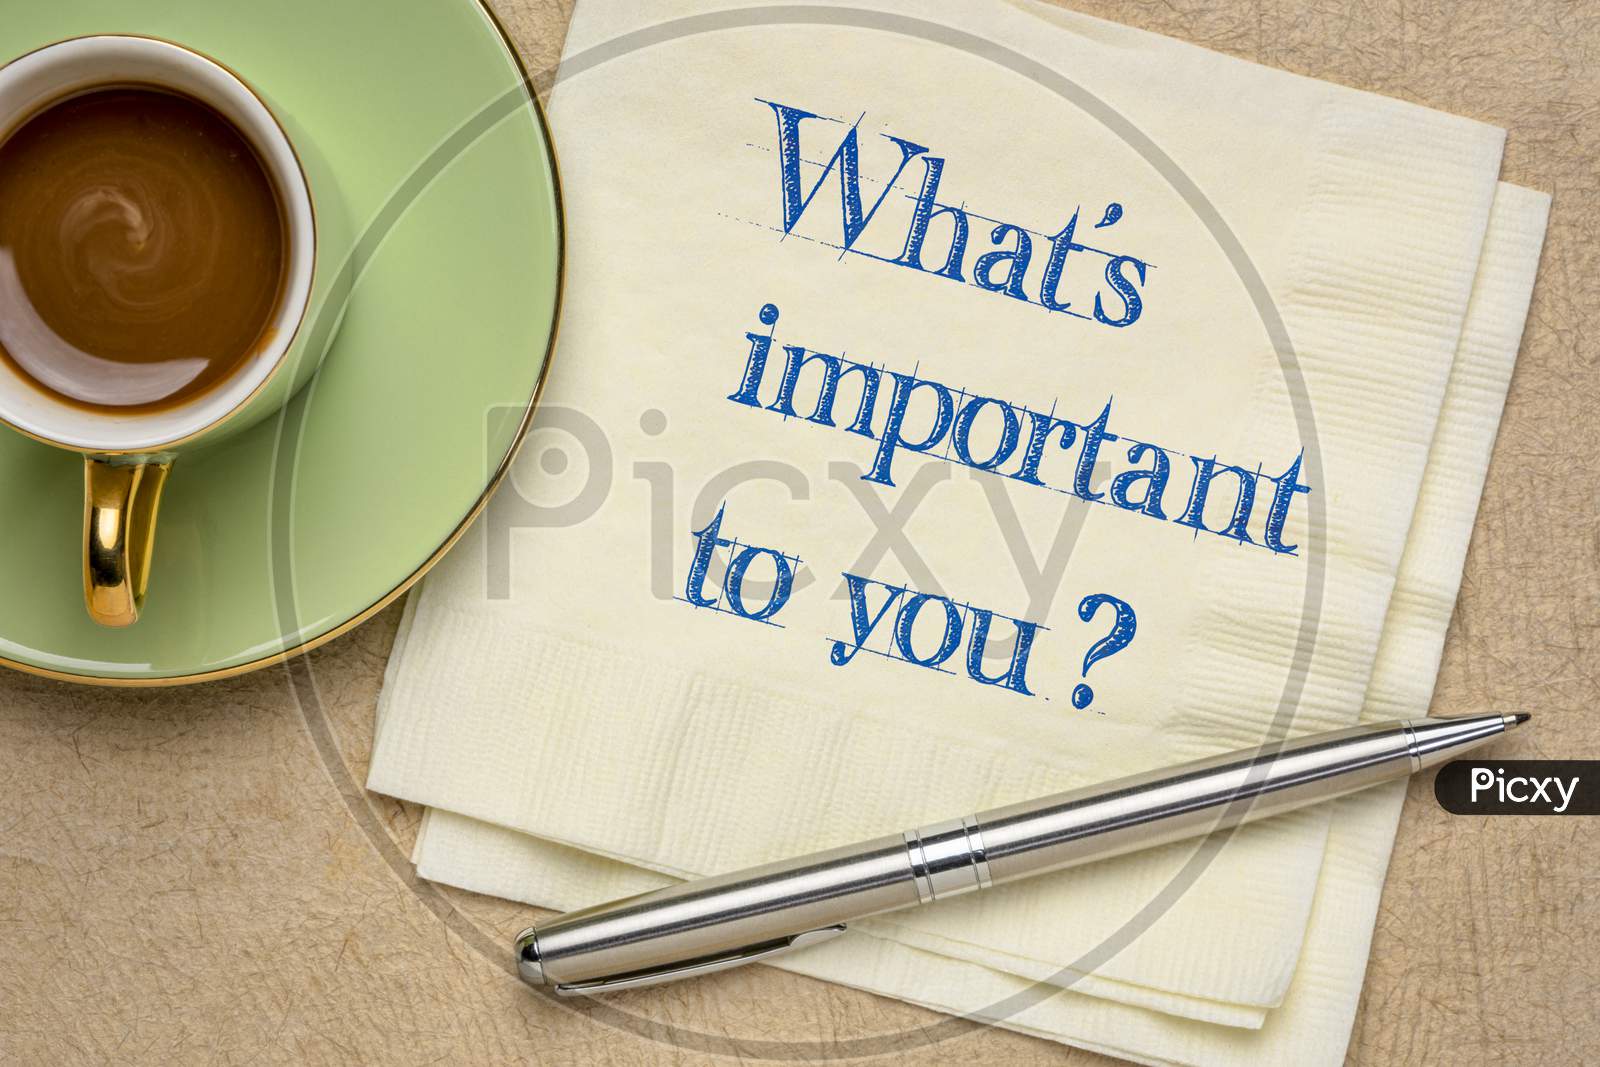 What Is Important To You? Handwriting On A Napkin With Coffee. Lifestyle, Career And Personal Development Concept.